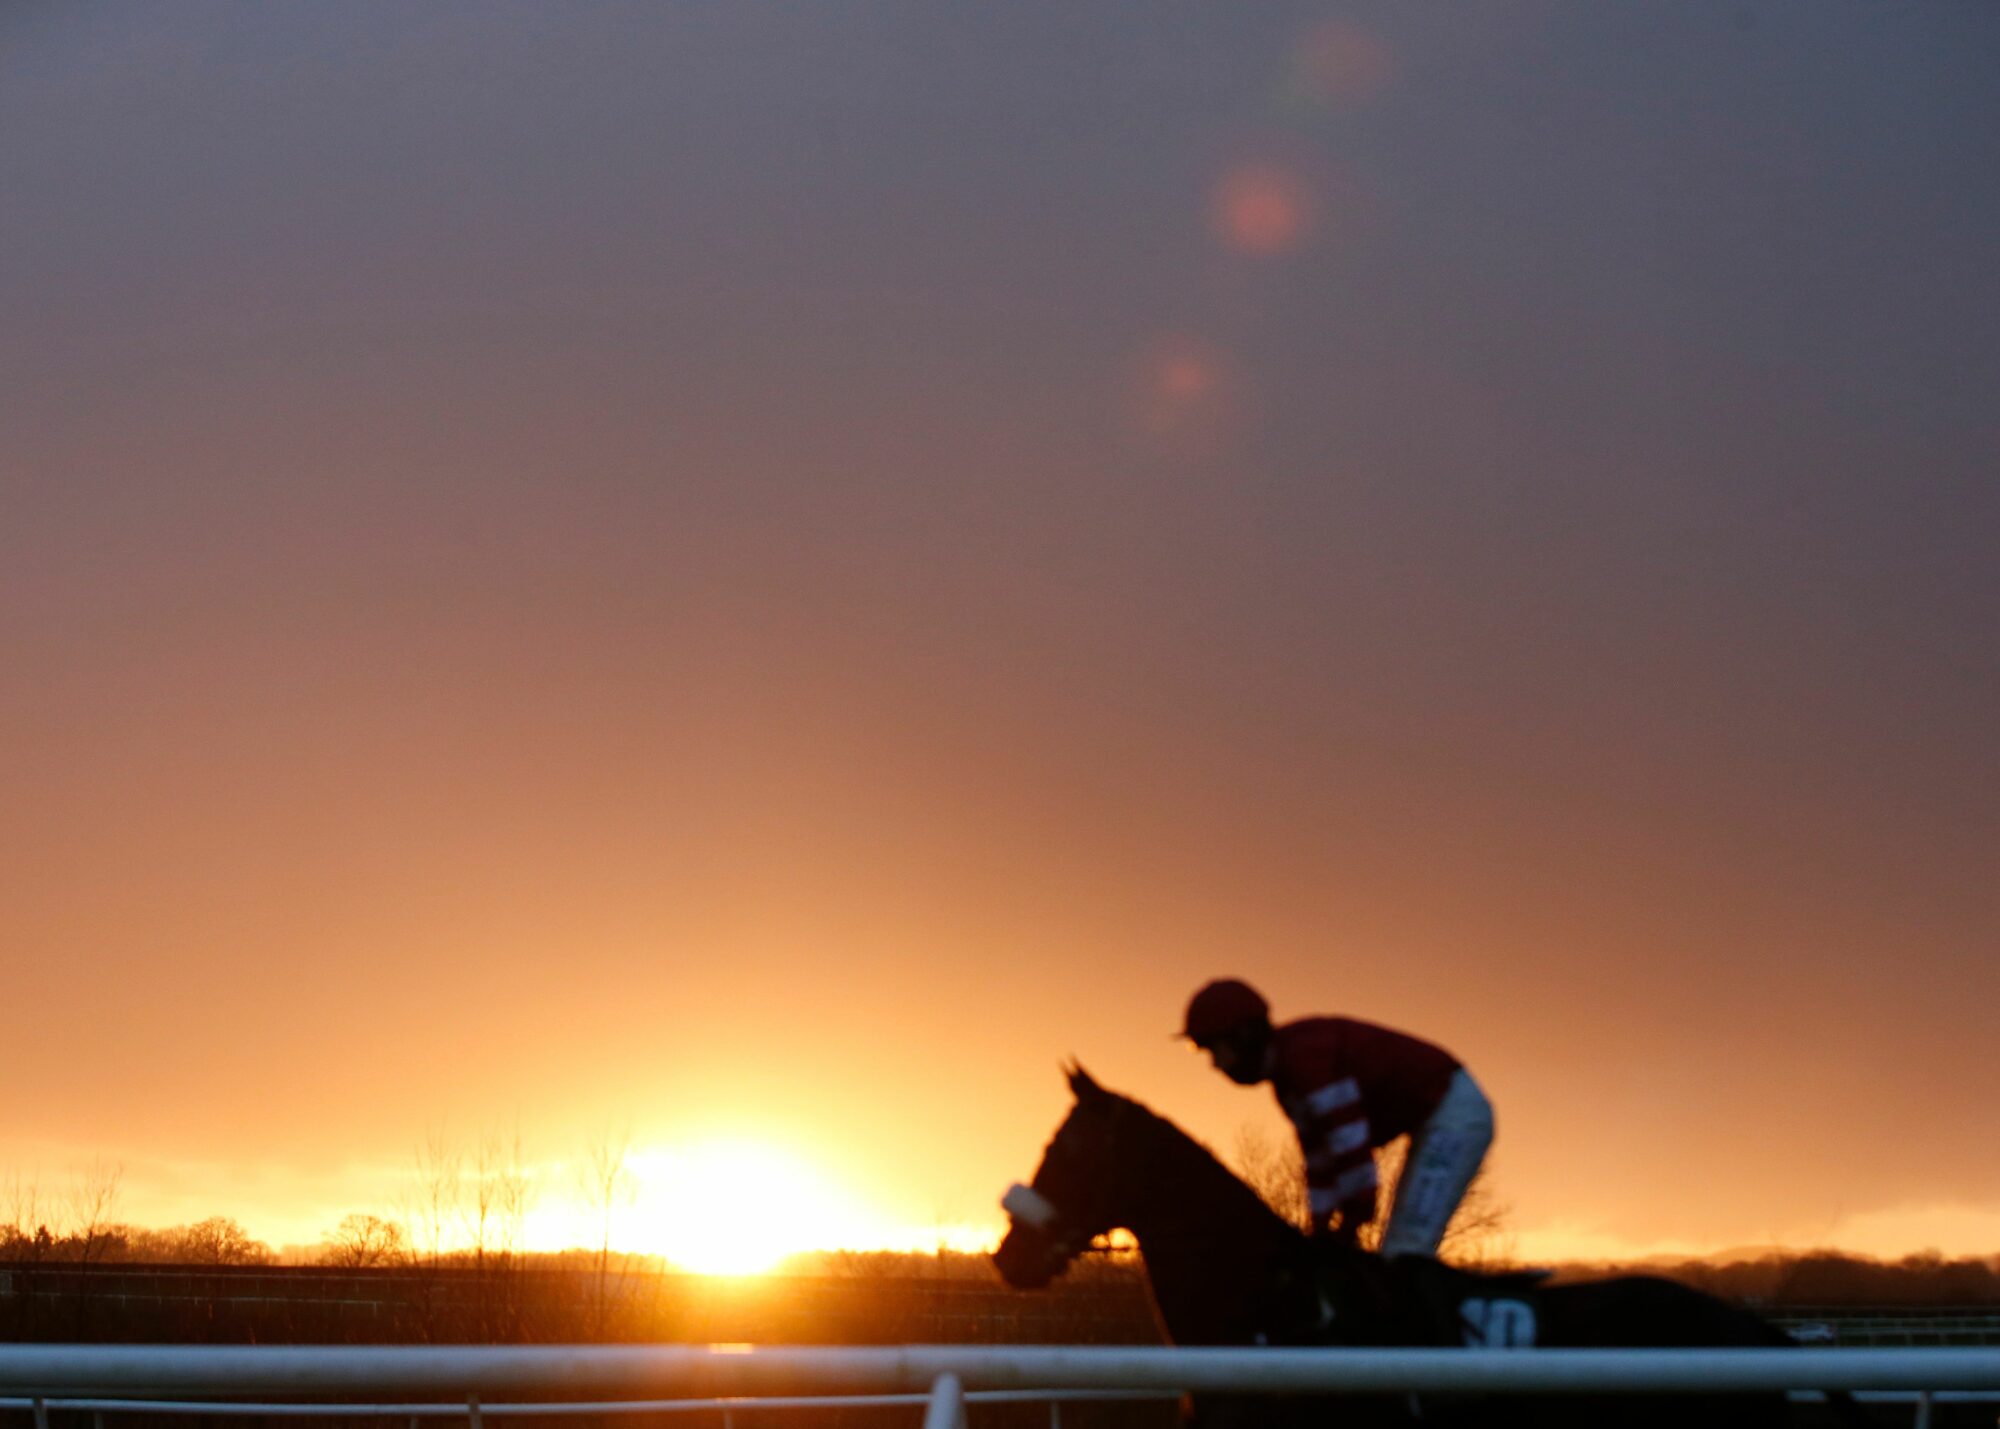 Image name blurry sunset racehorse jockey catterick racecourse yorkshire the 20 image from the post Catterick Jump Race at Catterick Racecourse on Thursday, December 28, 2023 in Yorkshire.com.